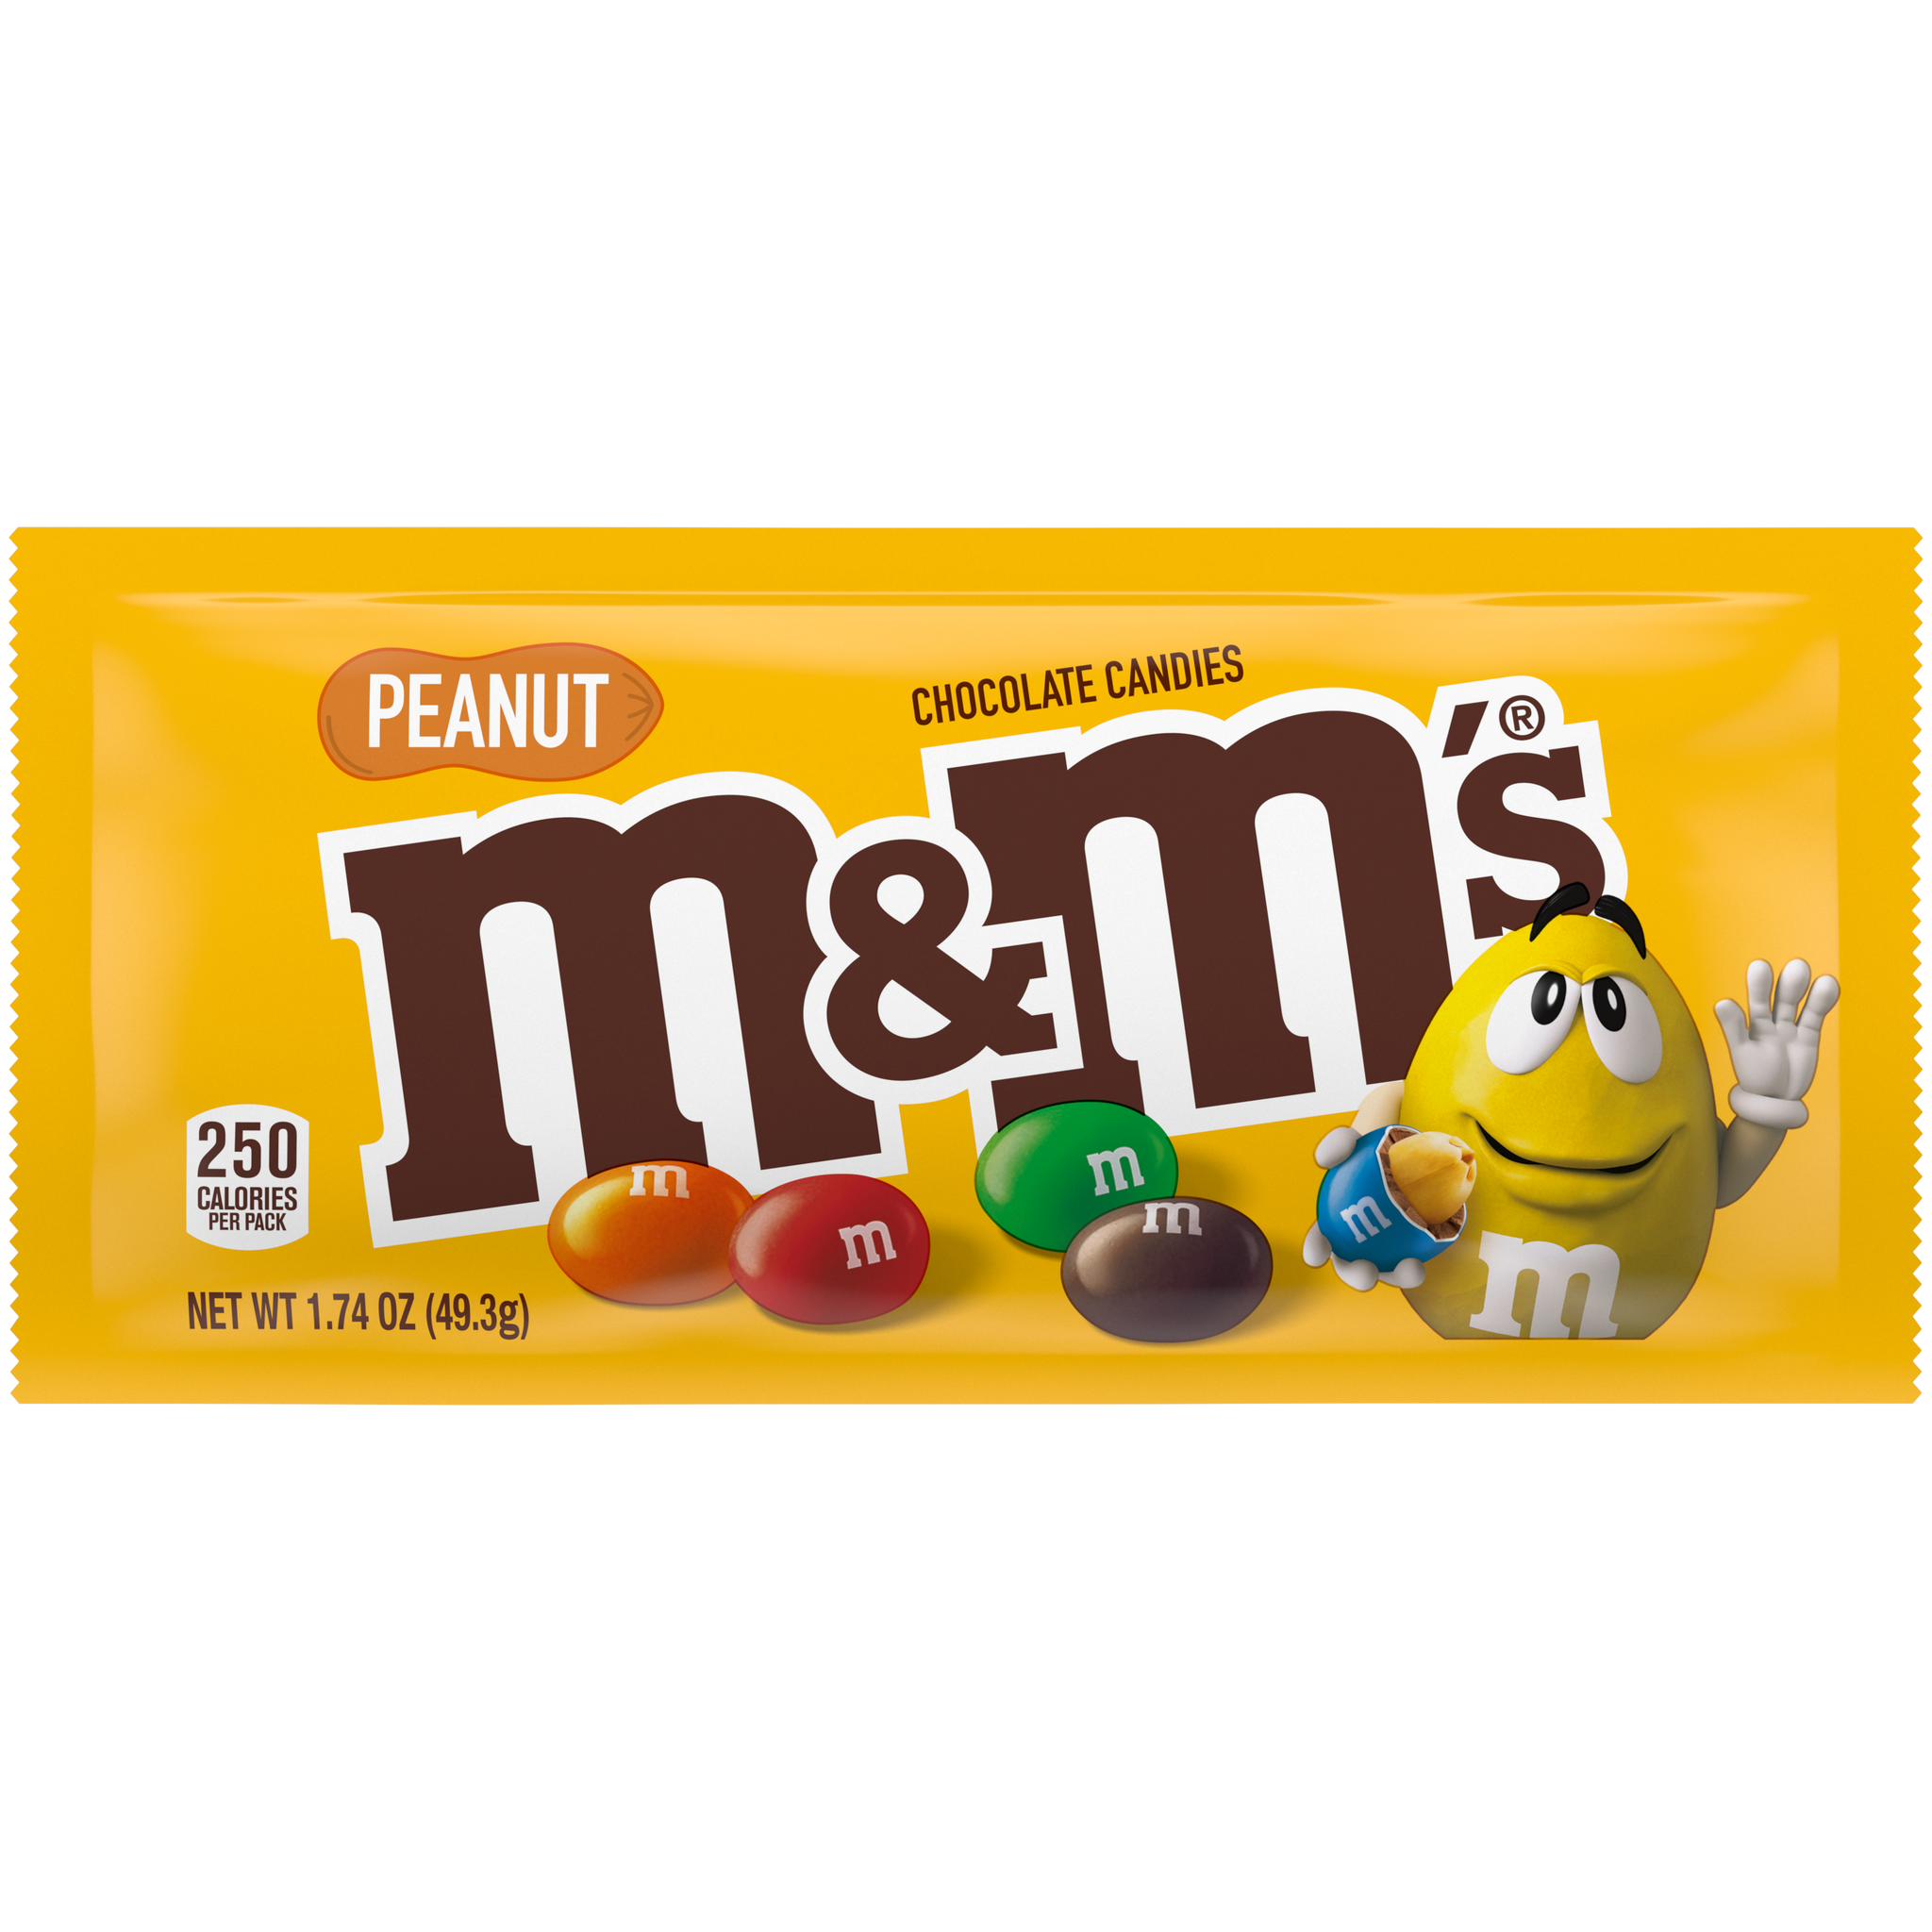 Black and Red M&M's Chocolate Candy • M&M's Chocolate Candy